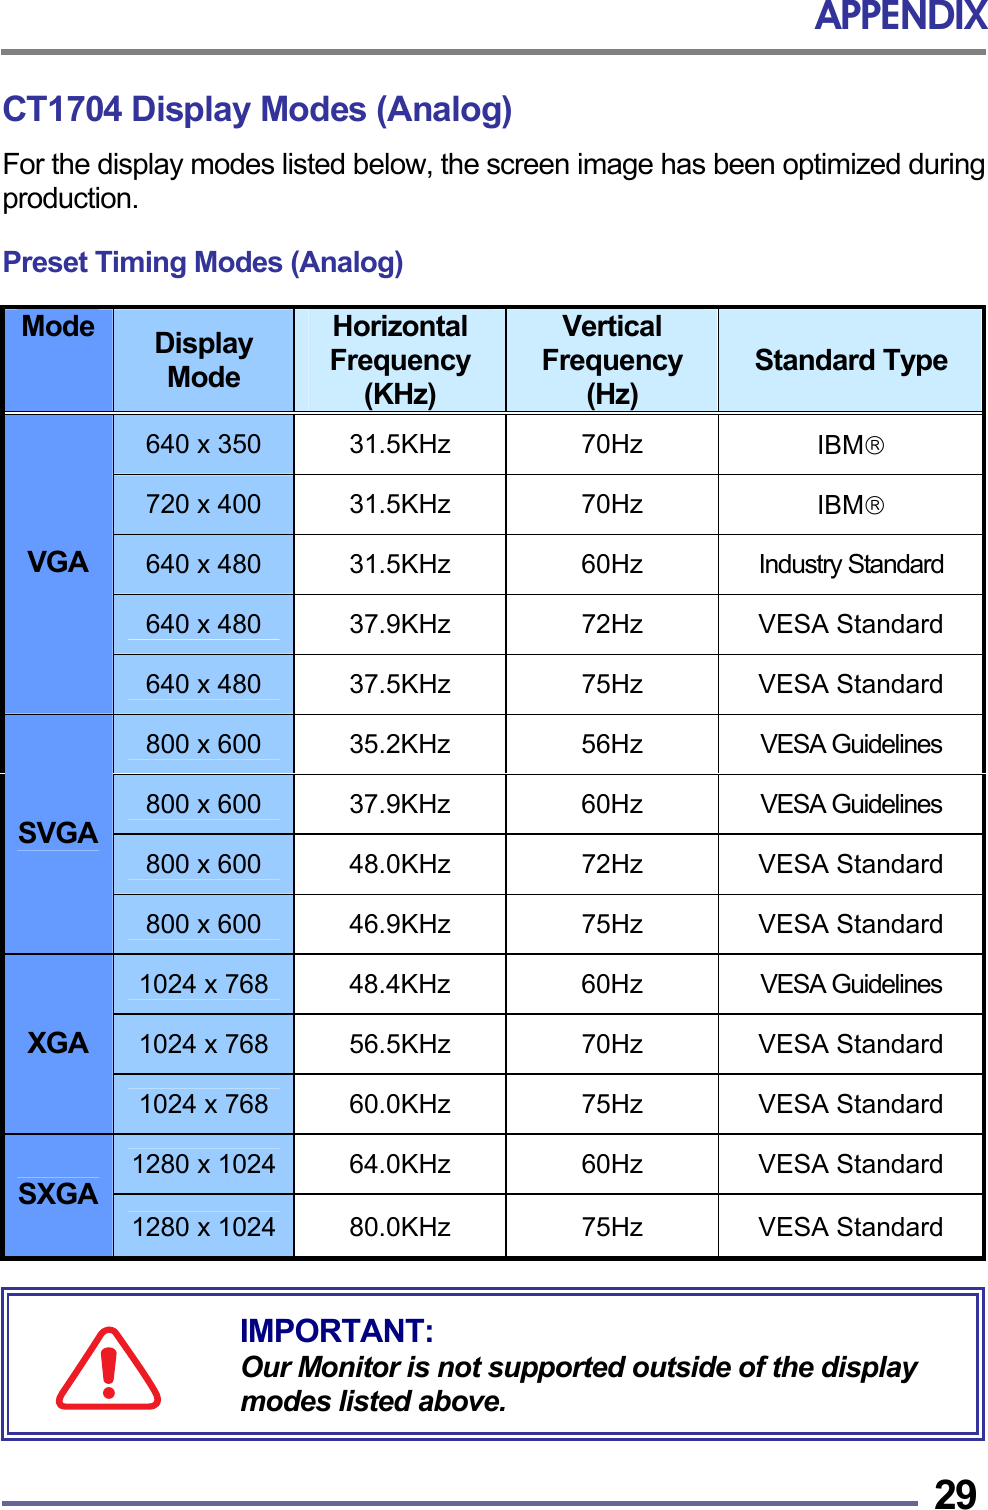 APPENDIX   29CT1704 Display Modes (Analog) For the display modes listed below, the screen image has been optimized during production.  Preset Timing Modes (Analog)  Mode   Display Mode Horizontal Frequency (KHz) Vertical Frequency (Hz) Standard Type 640 x 350  31.5KHz 70Hz  IBM 720 x 400  31.5KHz 70Hz  IBM 640 x 480  31.5KHz 60Hz Industry Standard 640 x 480  37.9KHz 72Hz VESA Standard VGA 640 x 480  37.5KHz 75Hz VESA Standard 800 x 600  35.2KHz 56Hz VESA Guidelines 800 x 600  37.9KHz 60Hz VESA Guidelines 800 x 600  48.0KHz 72Hz VESA Standard SVGA 800 x 600  46.9KHz 75Hz VESA Standard 1024 x 768  48.4KHz 60Hz VESA Guidelines 1024 x 768  56.5KHz 70Hz VESA Standard XGA 1024 x 768  60.0KHz 75Hz VESA Standard 1280 x 1024  64.0KHz 60Hz VESA Standard SXGA 1280 x 1024  80.0KHz 75Hz VESA Standard      IMPORTANT: Our Monitor is not supported outside of the display modes listed above. 